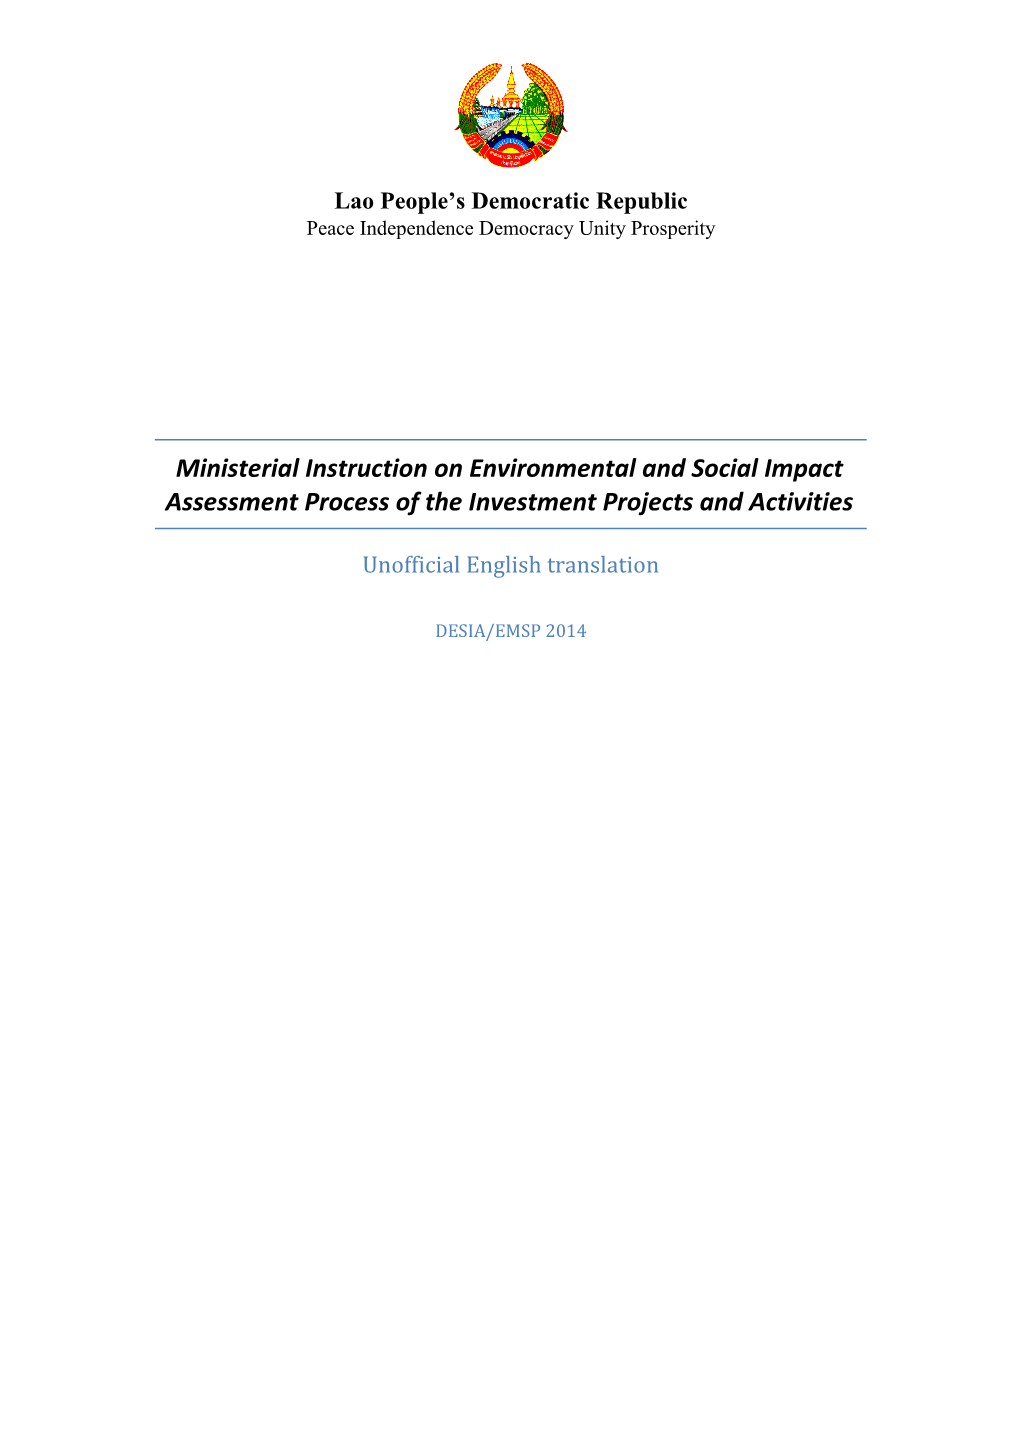 Ministerial Instruction on Environmental and Social Impact Assessment Process of the Investment